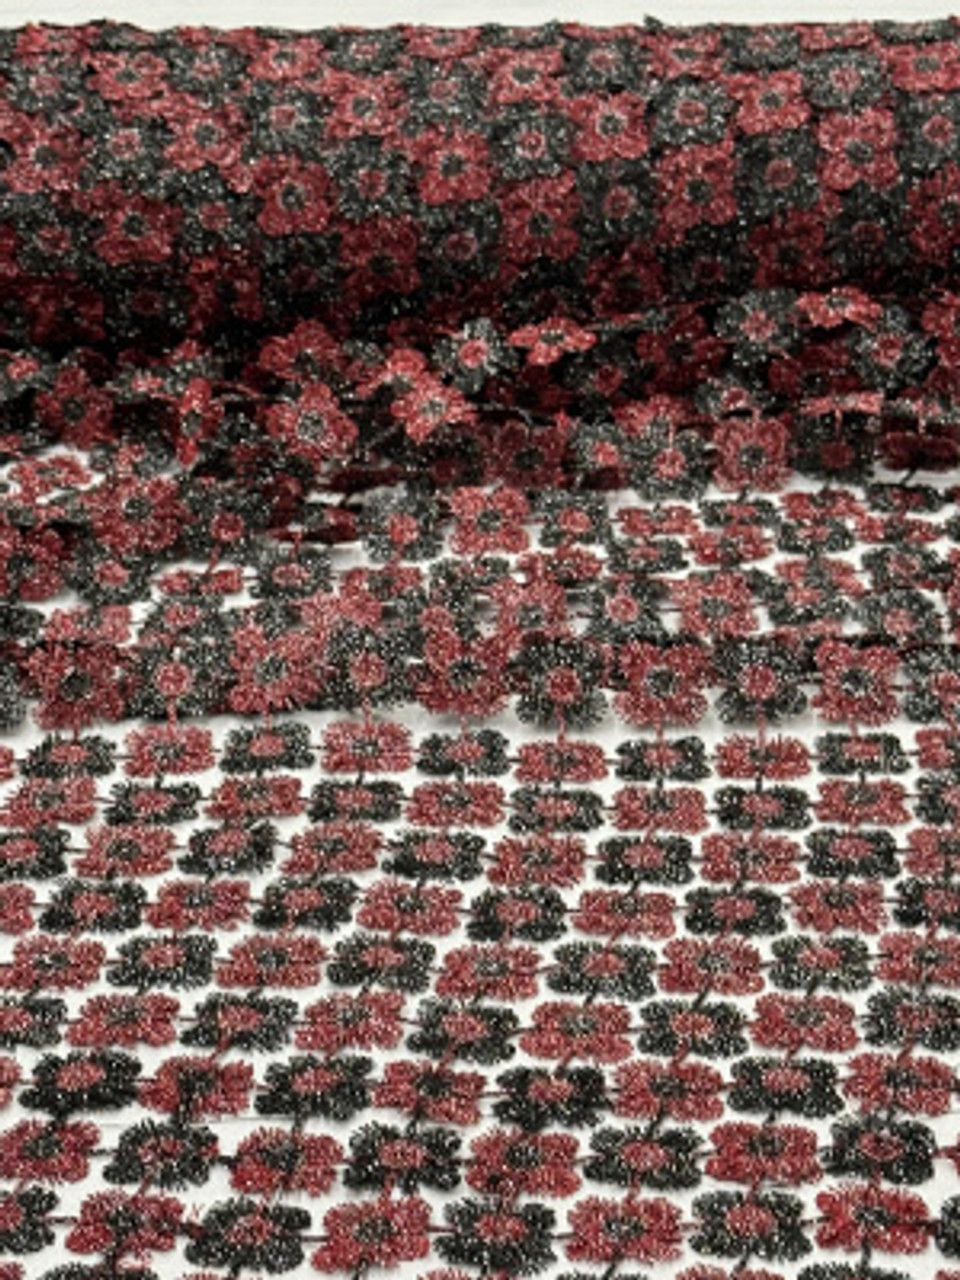 Clover Sheer Fabric Black Red